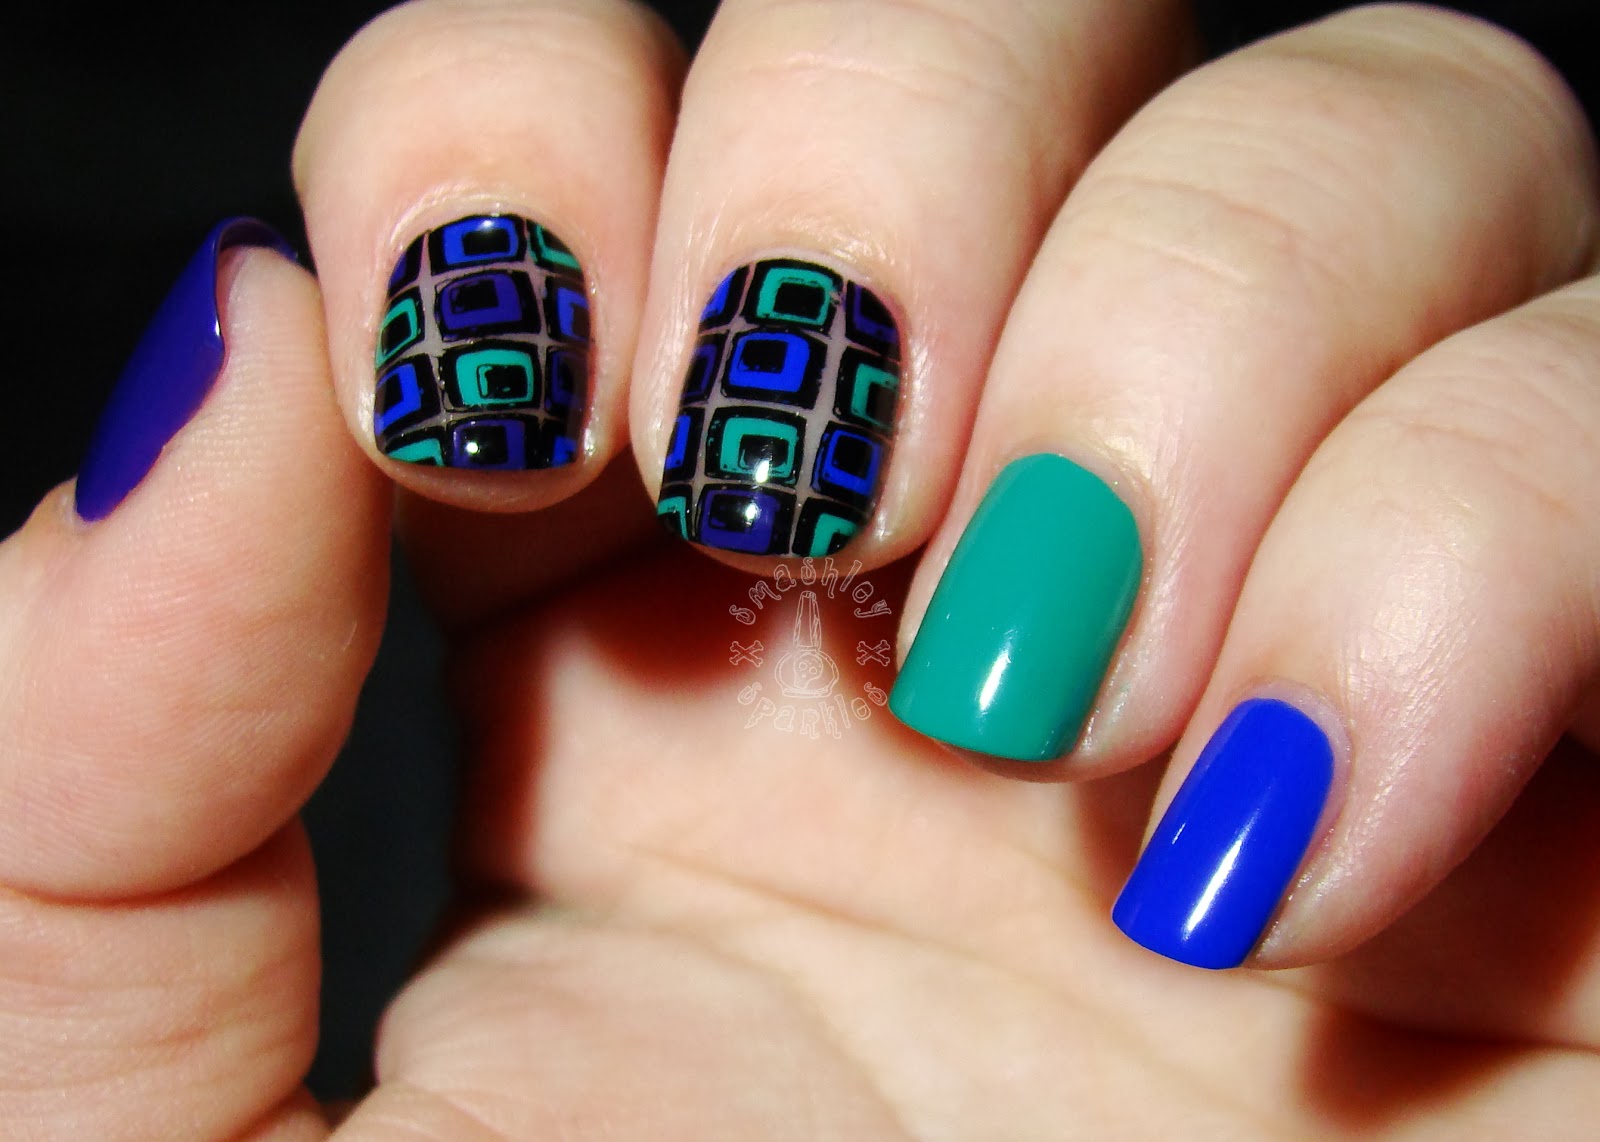 2. Vibrant and Colorful Nail Art Ideas - wide 3